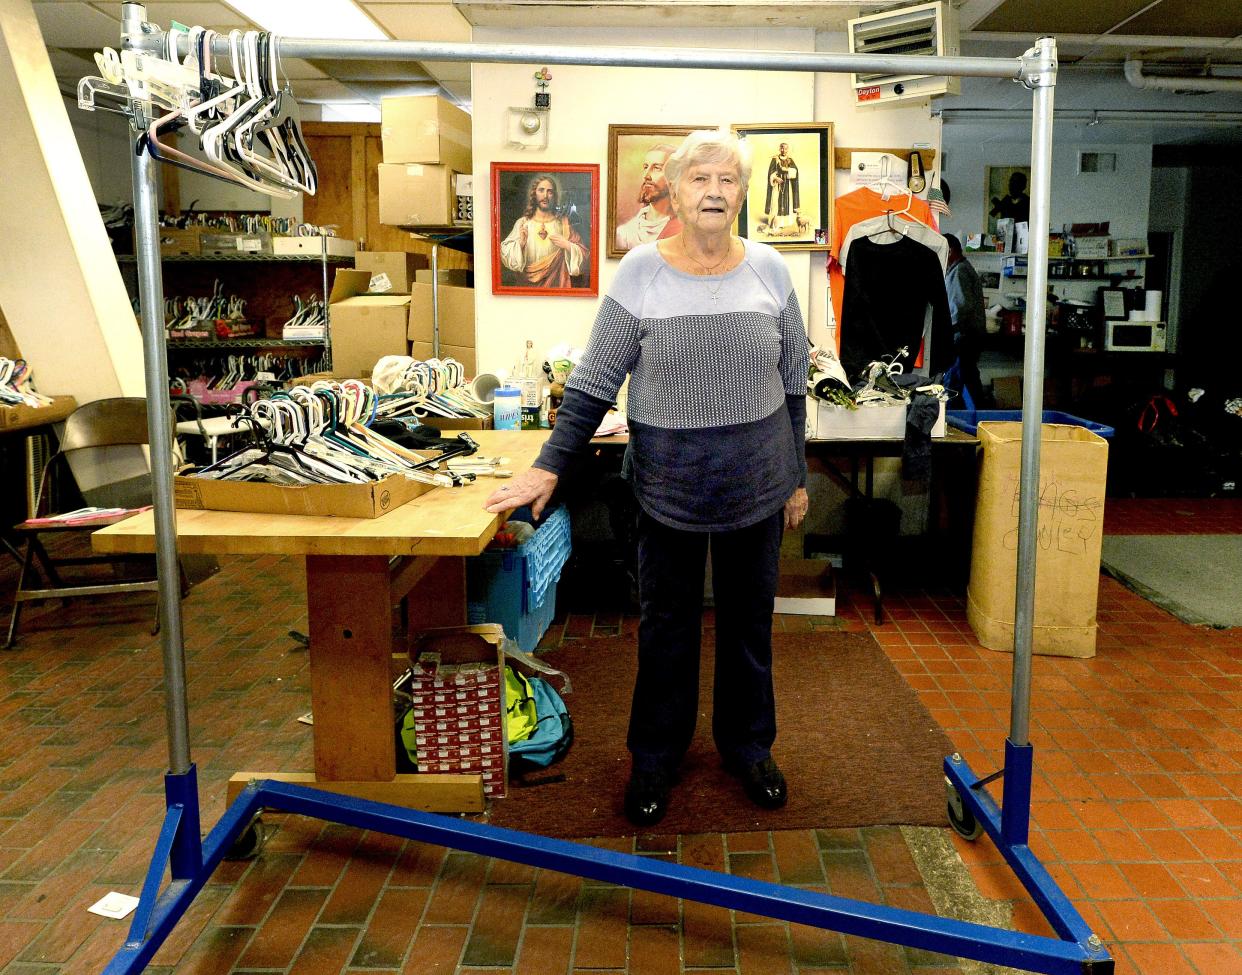 State Journal-Register First Citizen Patricia Benanti in the sorting room at St. Martin de Porres Center in Springfield earlier this month. Benanti started volunteering at the center after her brother, the late Jim Brahler, asked her.